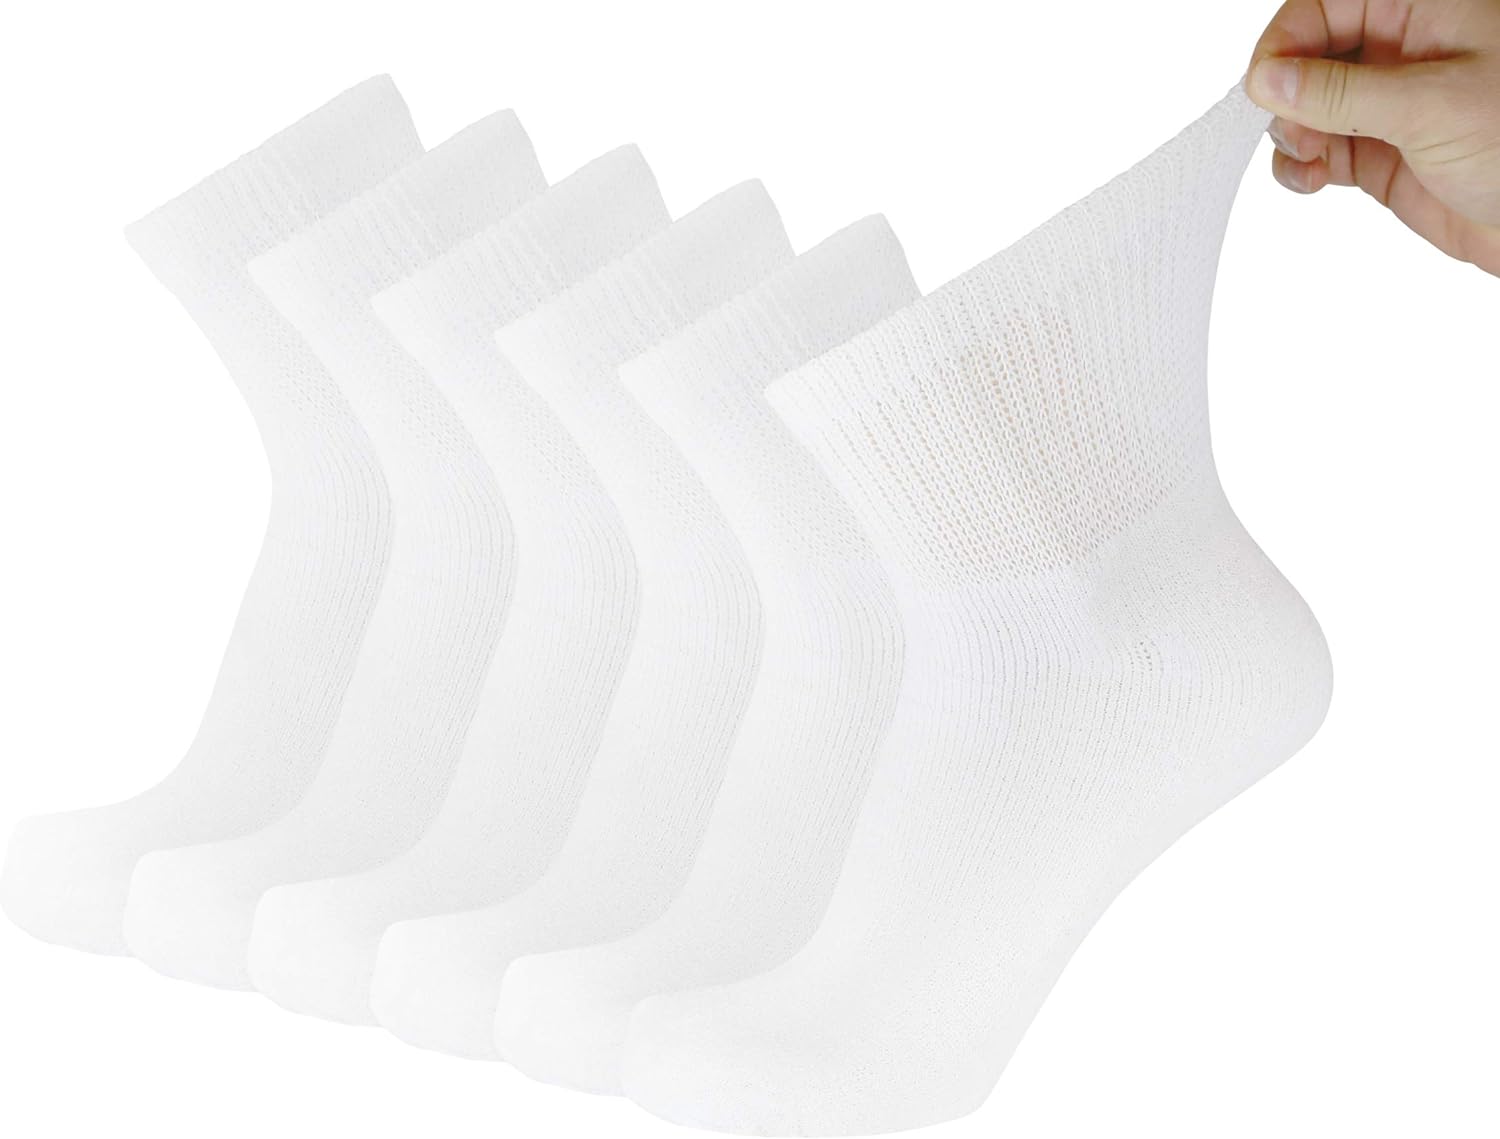 Big and Tall Diabetic Neuropathy Ankle Socks, King Size Mens Athletic Quarter Socks Size: 13-16